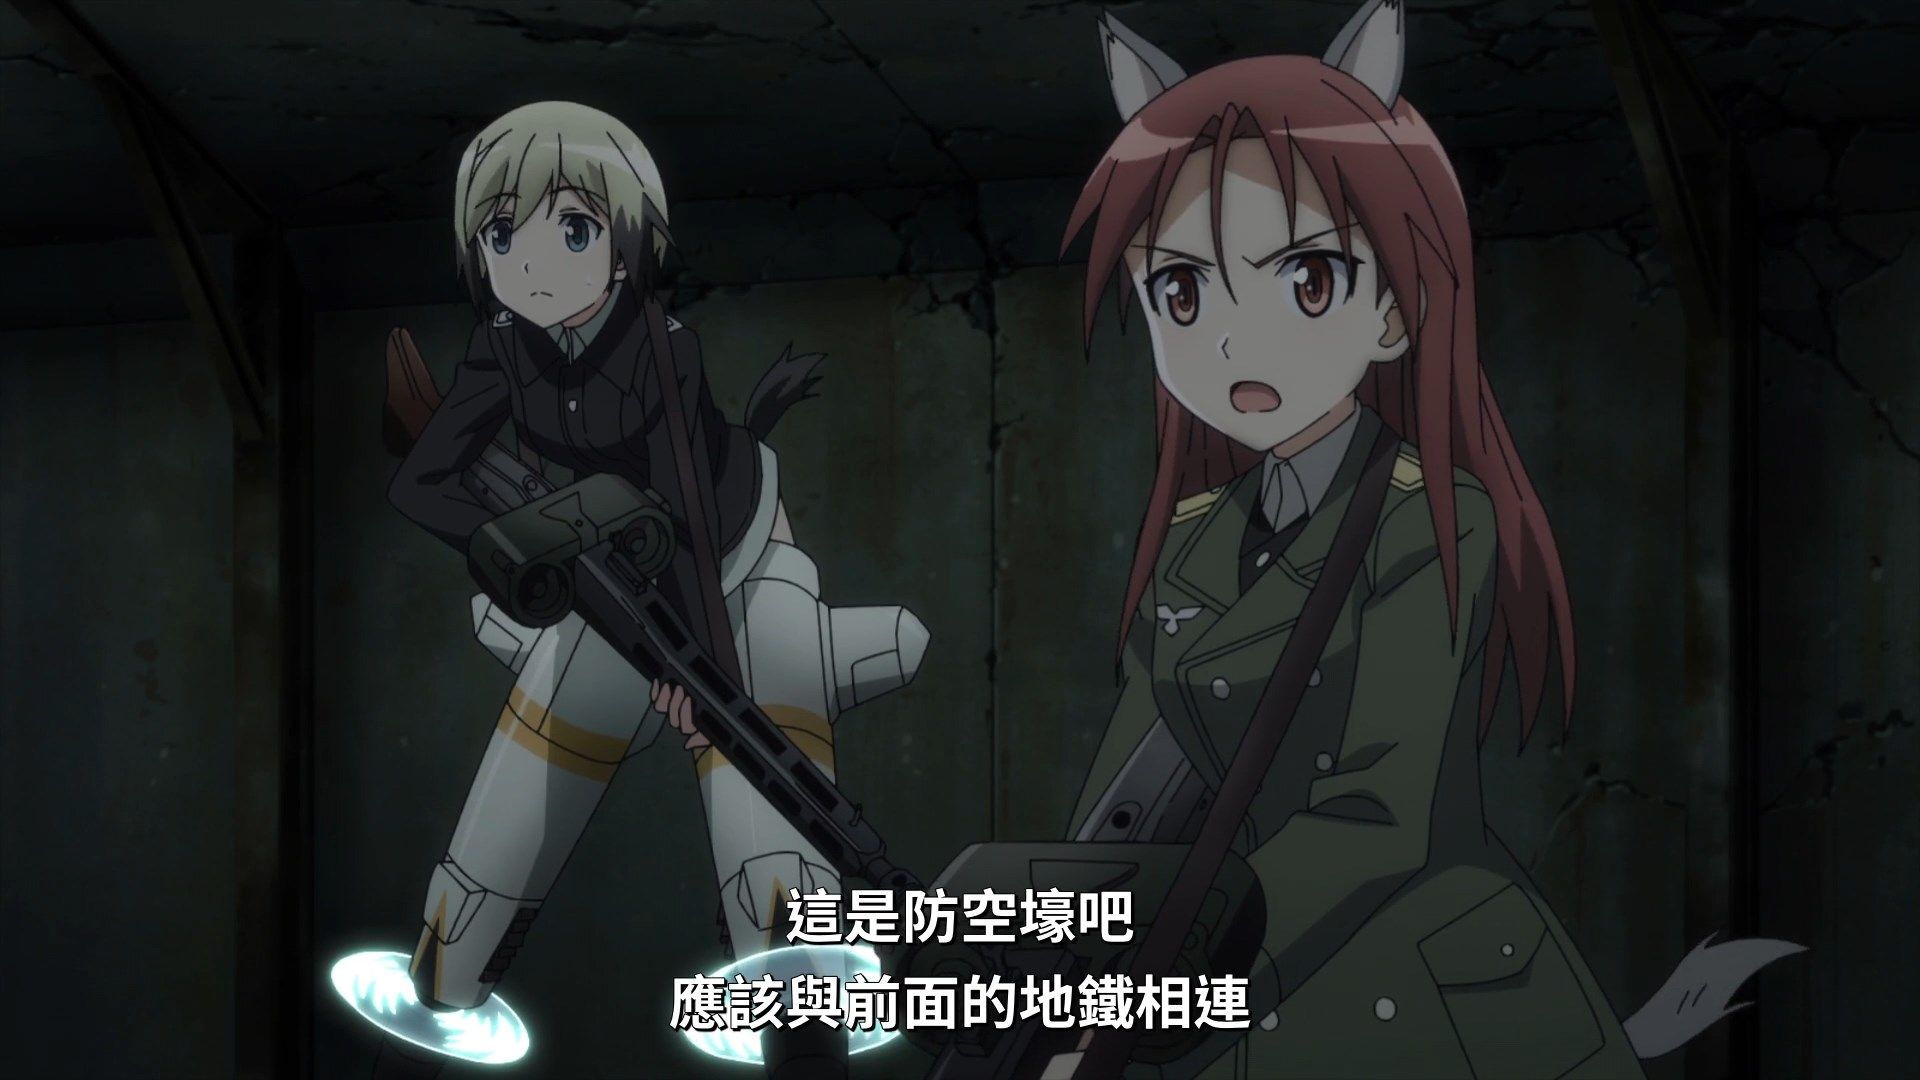 _Lilith_Raws_Strike_Witches_Road_to_Berlin_12_Baha_WEB_DL_1080p_AVC_AAC_CHT_MKV_.mkv_snapshot_04.19